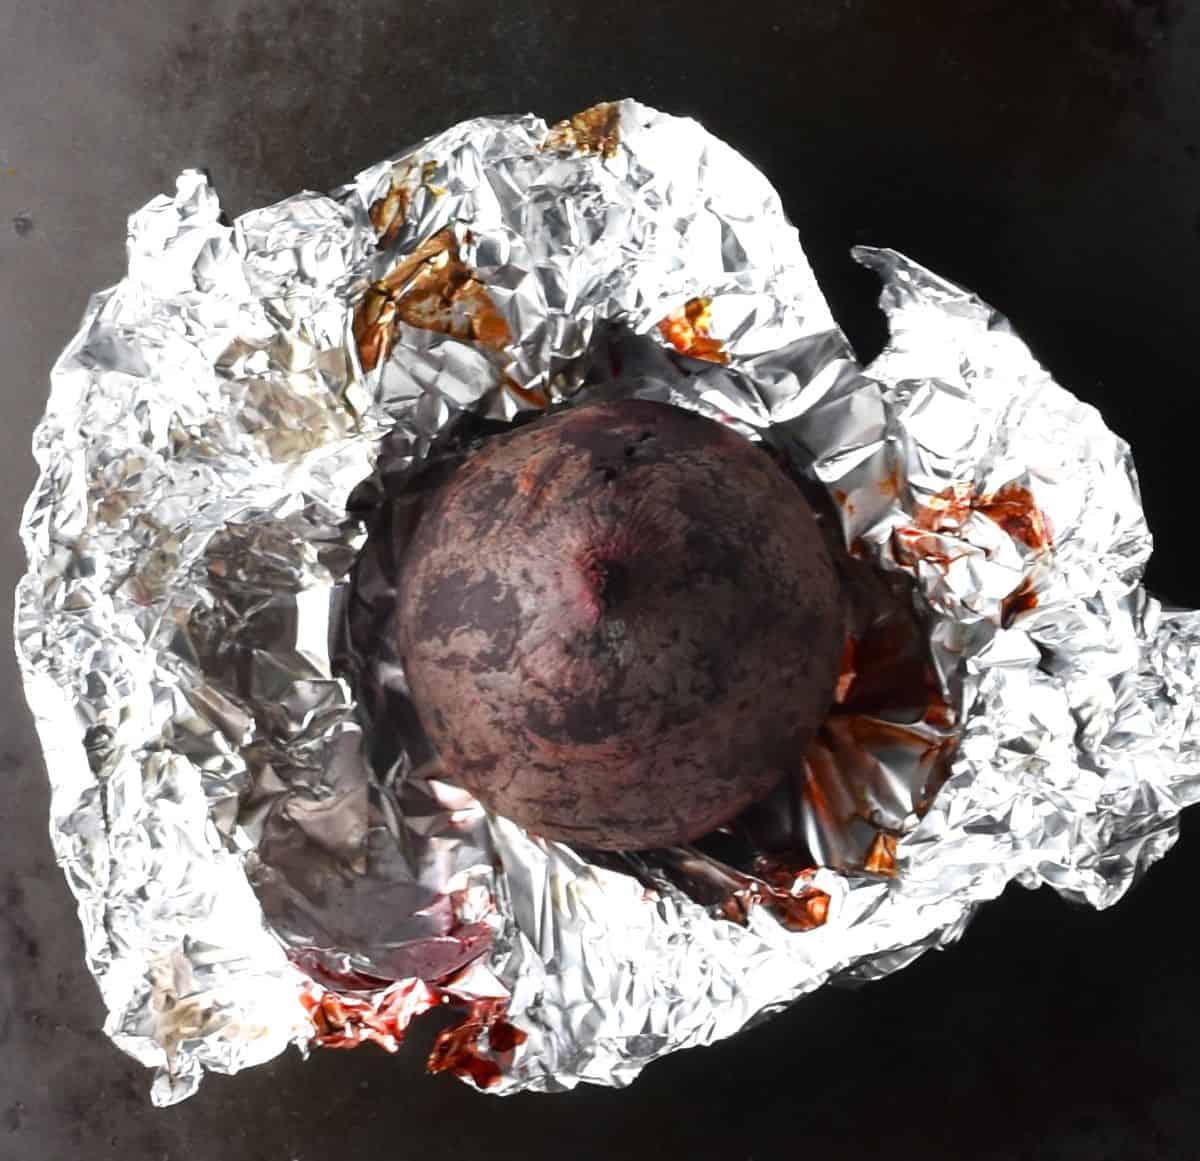 Roasted beet in tin foil.